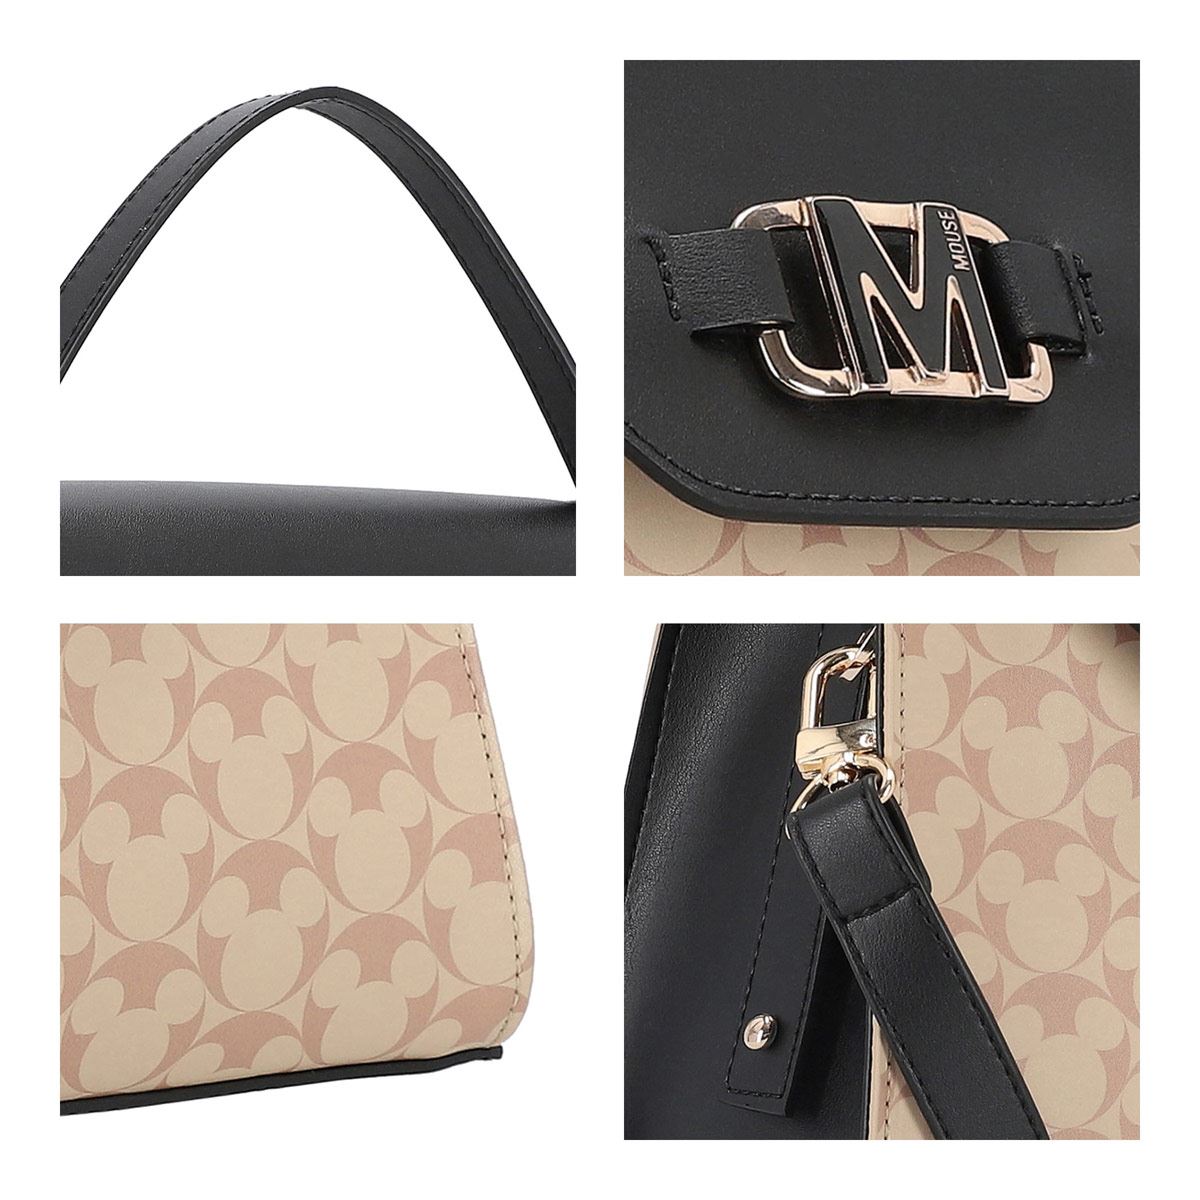 Bolsa tote W Capsule Nature Friends Mickey Mouse para mujer